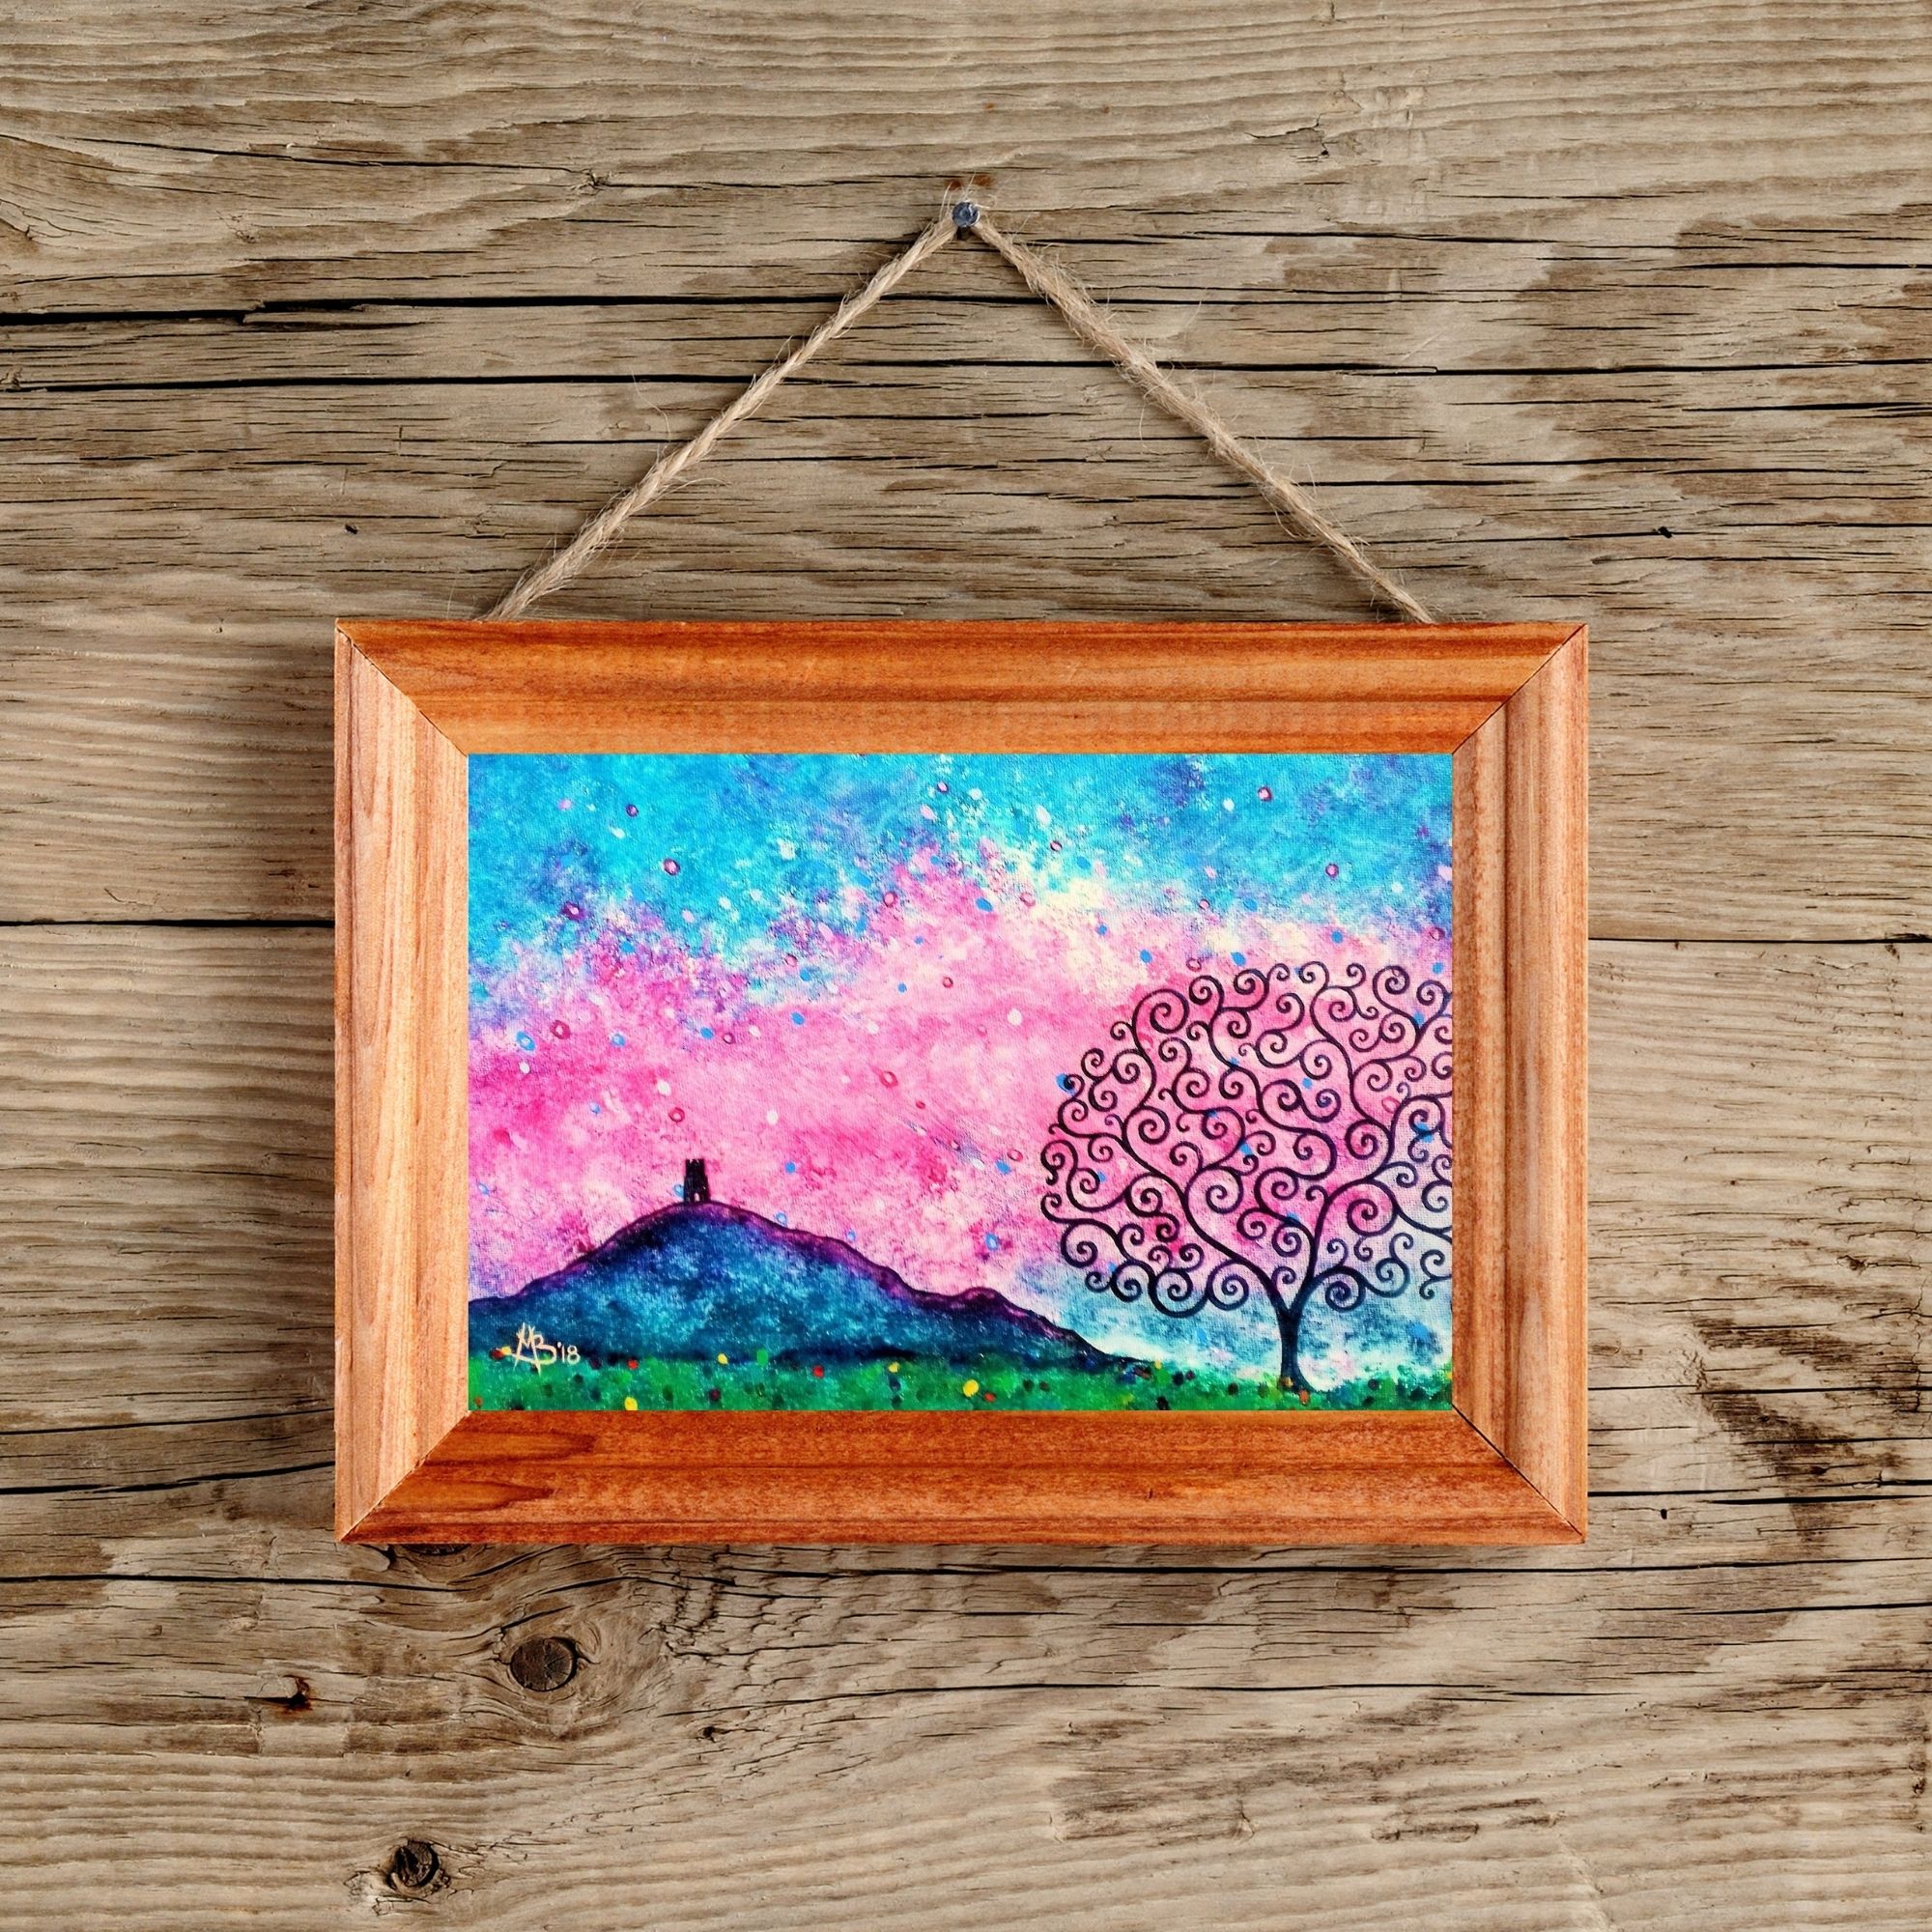 Colourful purple and pink Glastonbury Tor and Tree of Life art print, down;oad and print at home, in a wood effect frame (not available to purchase)